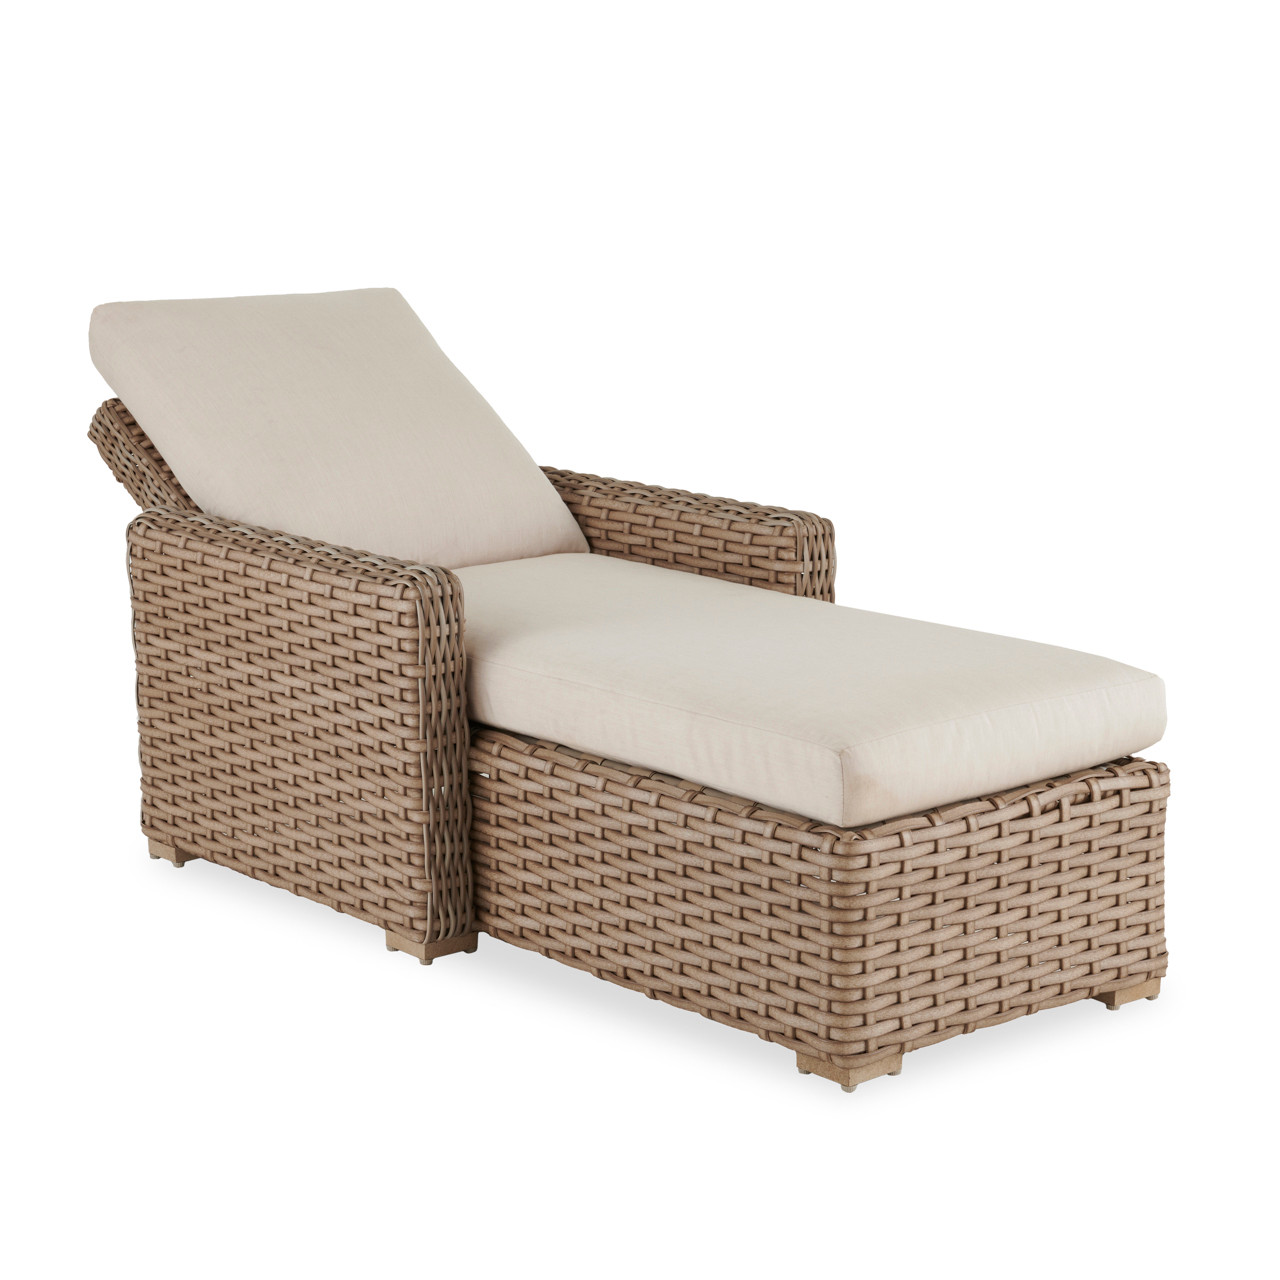 Siesta Aged Teak Outdoor Wicker and Cushion Chaise Lounge